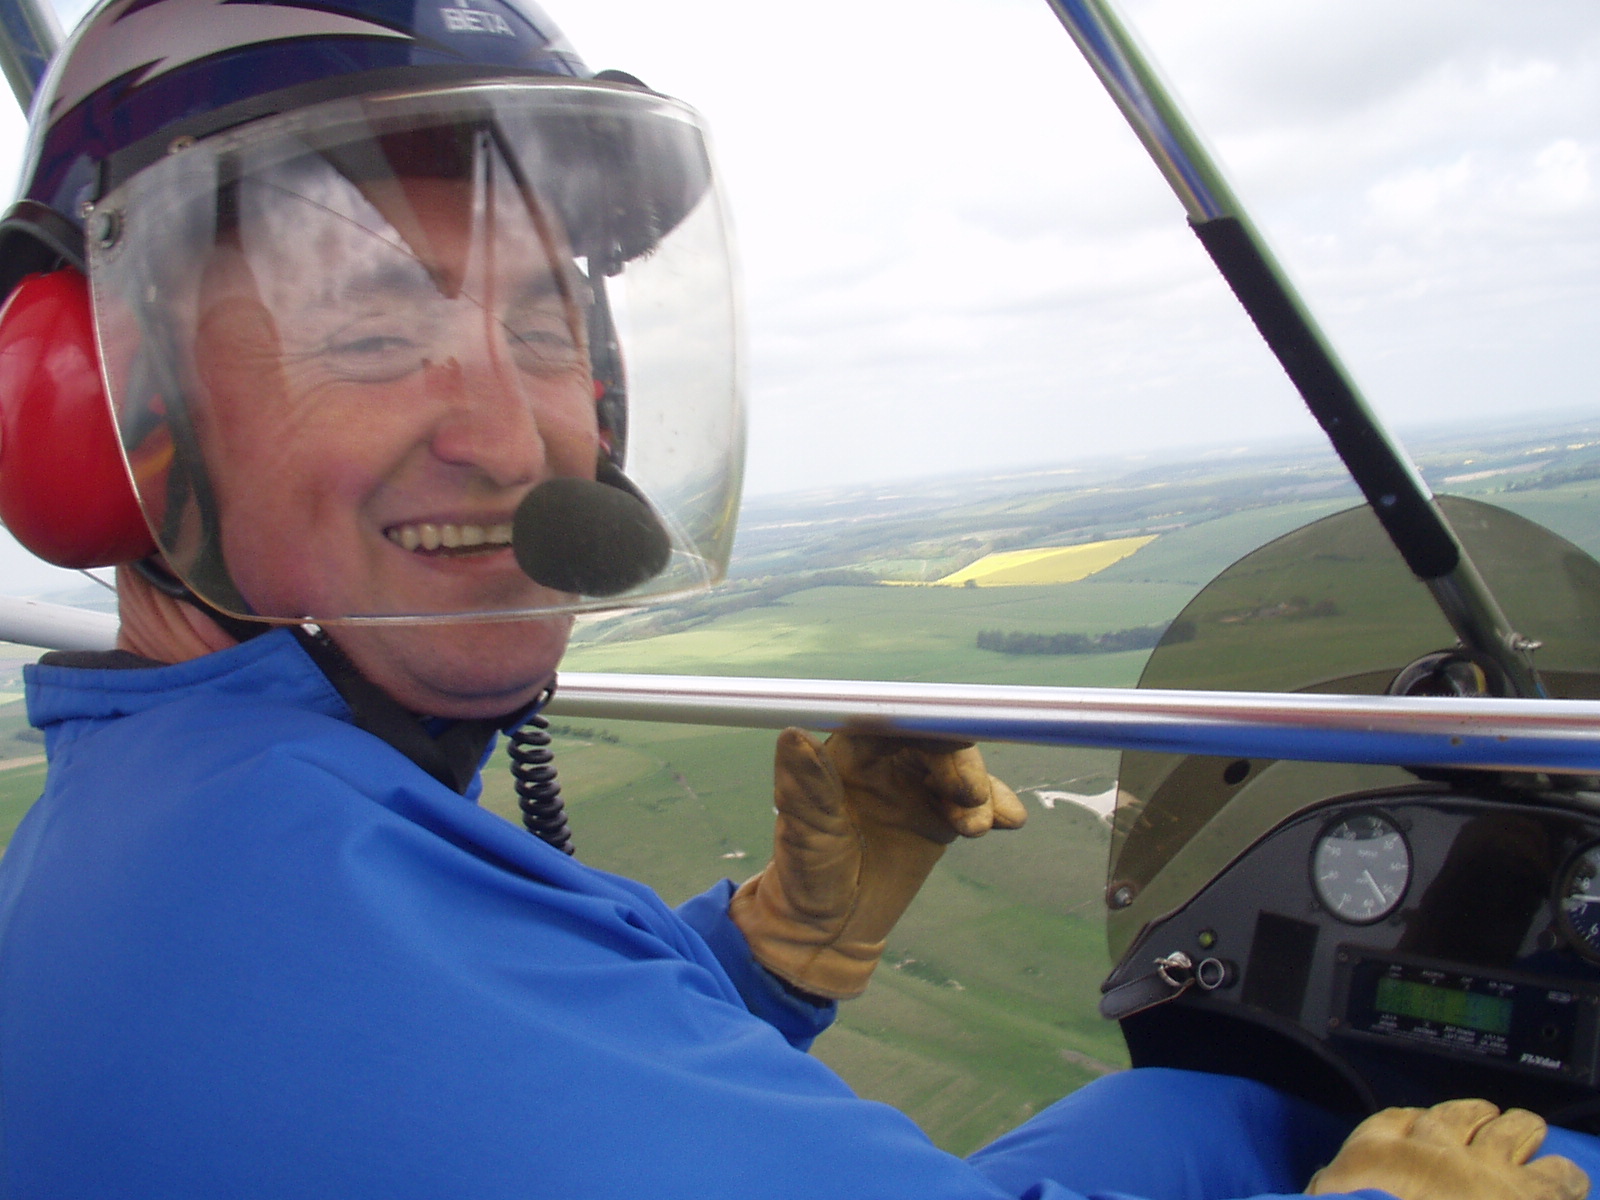 AN INTRODUCTION TO MICROLIGHT FLYING